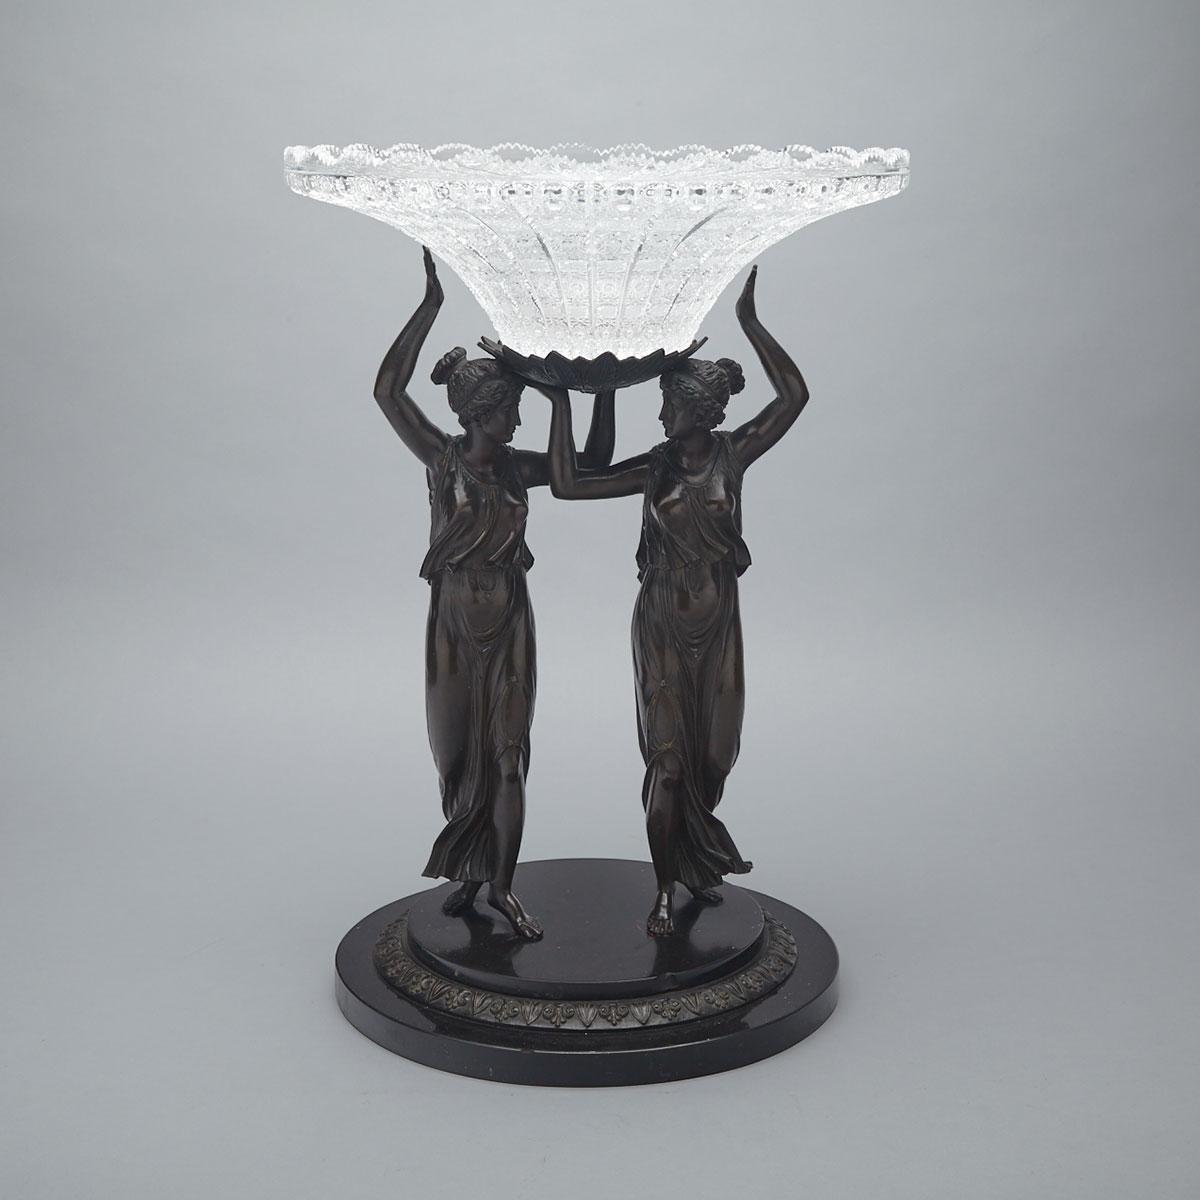 Large French Patinated Bronze and Cut Glass Centerpiece Figural Tazza, early/mid 20th century